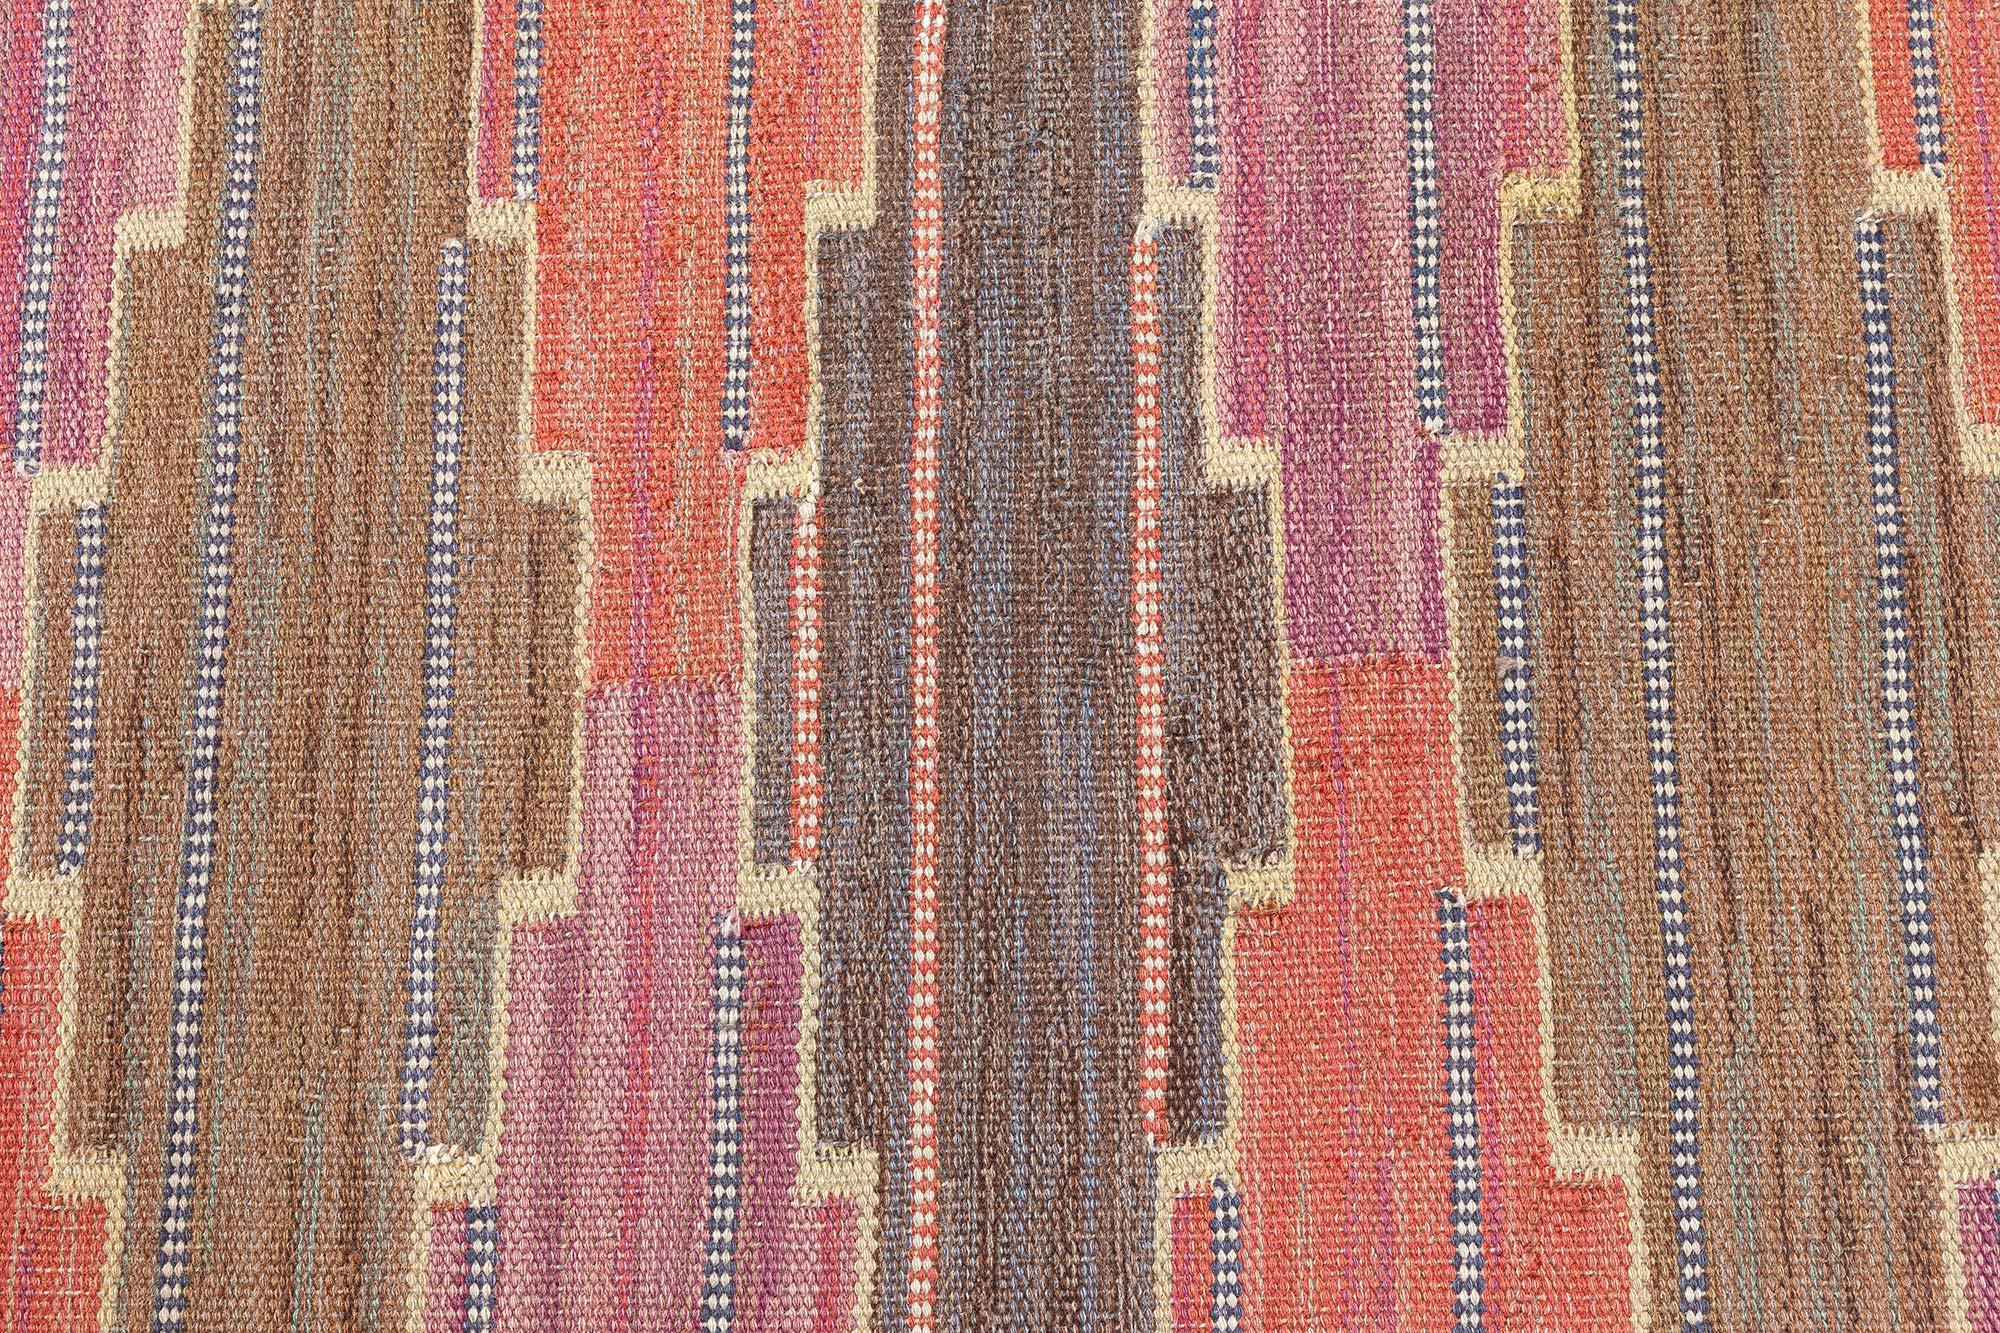 Vintage Swedish Flat Woven Rug by Marta Maas Fjetterstrom
Size: 6'10